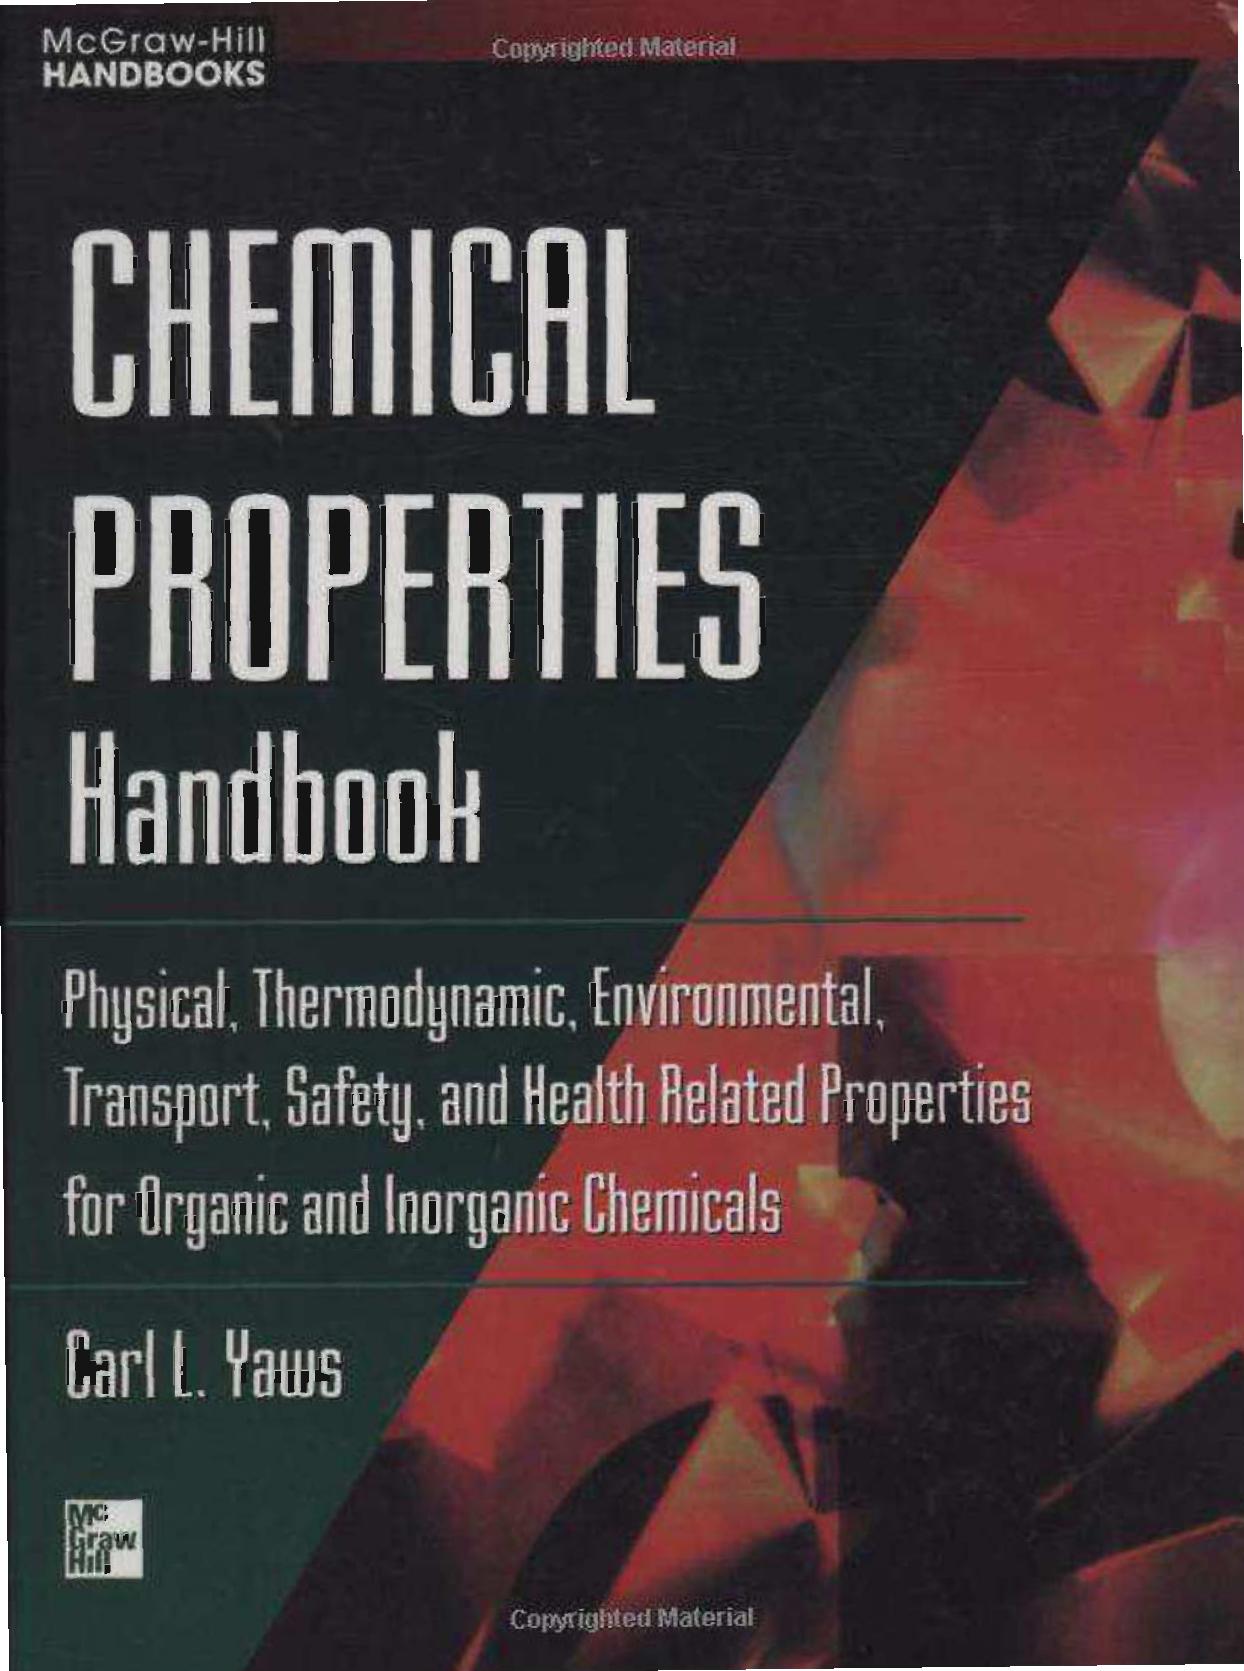 Chemical Properties Handbook  Physical, Thermodynamics, Engironmental Transport, Safety and Health Related Properties for Organic and Inorganic Chemicals 2015